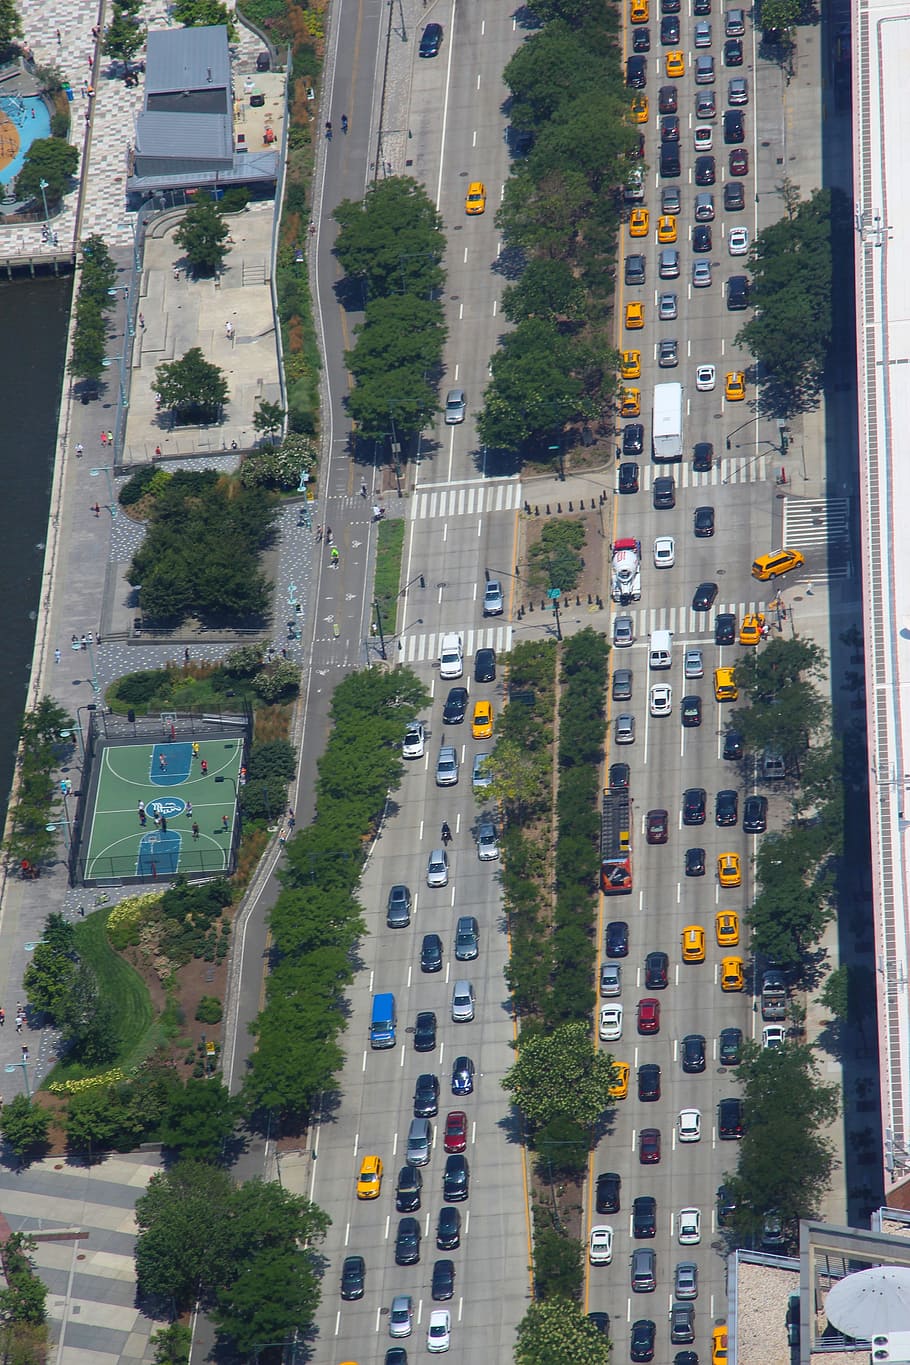 New York, York, Street, Taxi, Yellow, Traffic, street, traffic jam, cars, perspective, aerial view